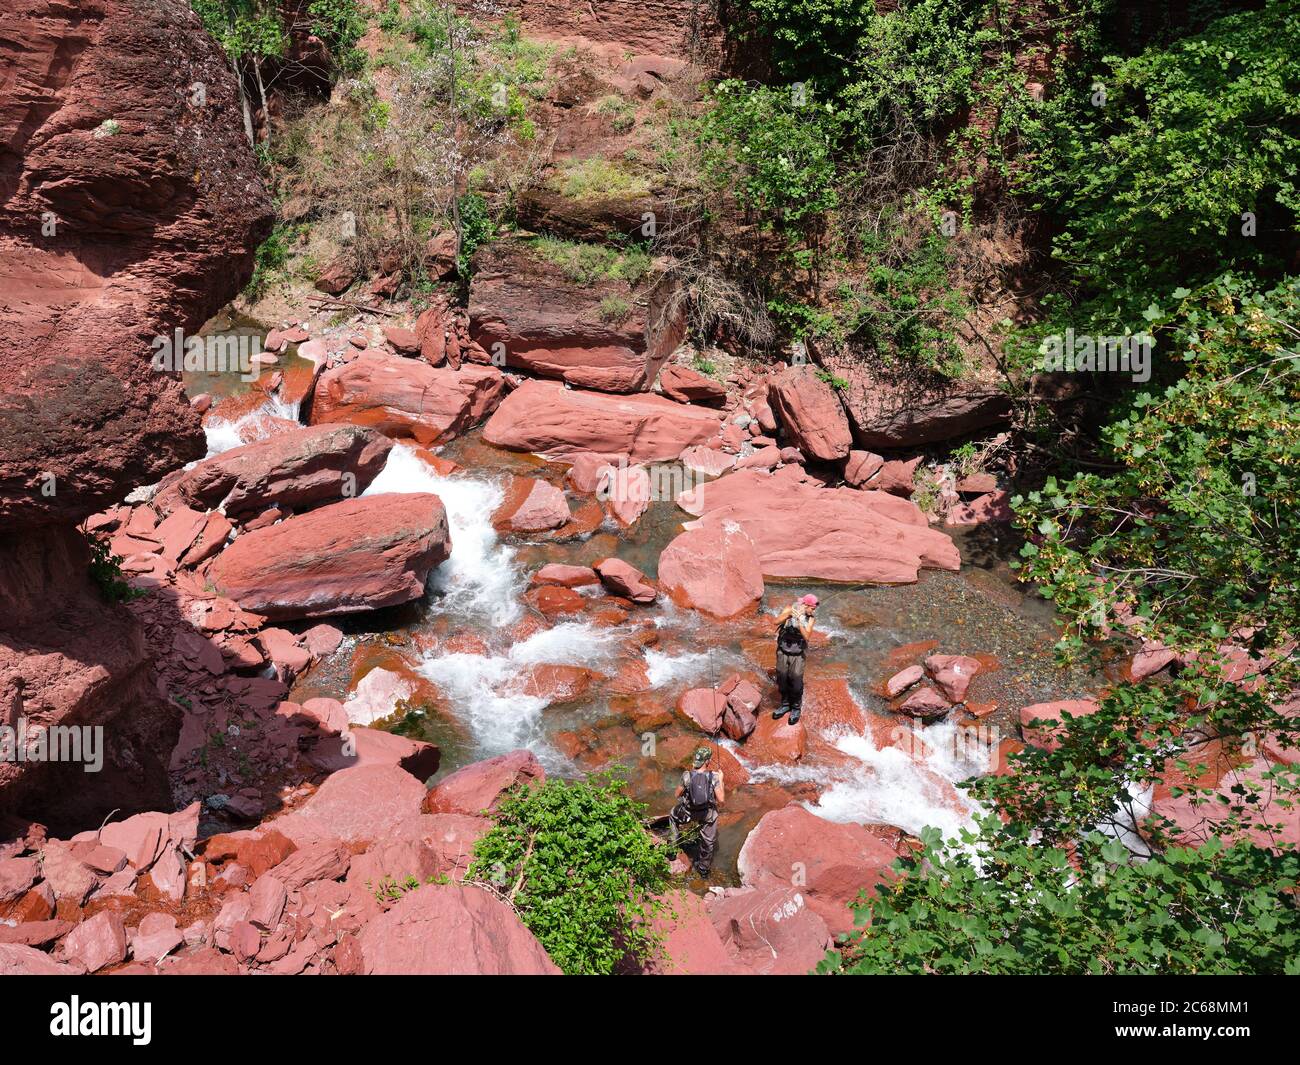 Two young men fly fishing in a picturesque river in a canyon of red pelite rocks. Cians River, Gorges du Cians, Beuil, Alpes-Maritimes, France. Stock Photo